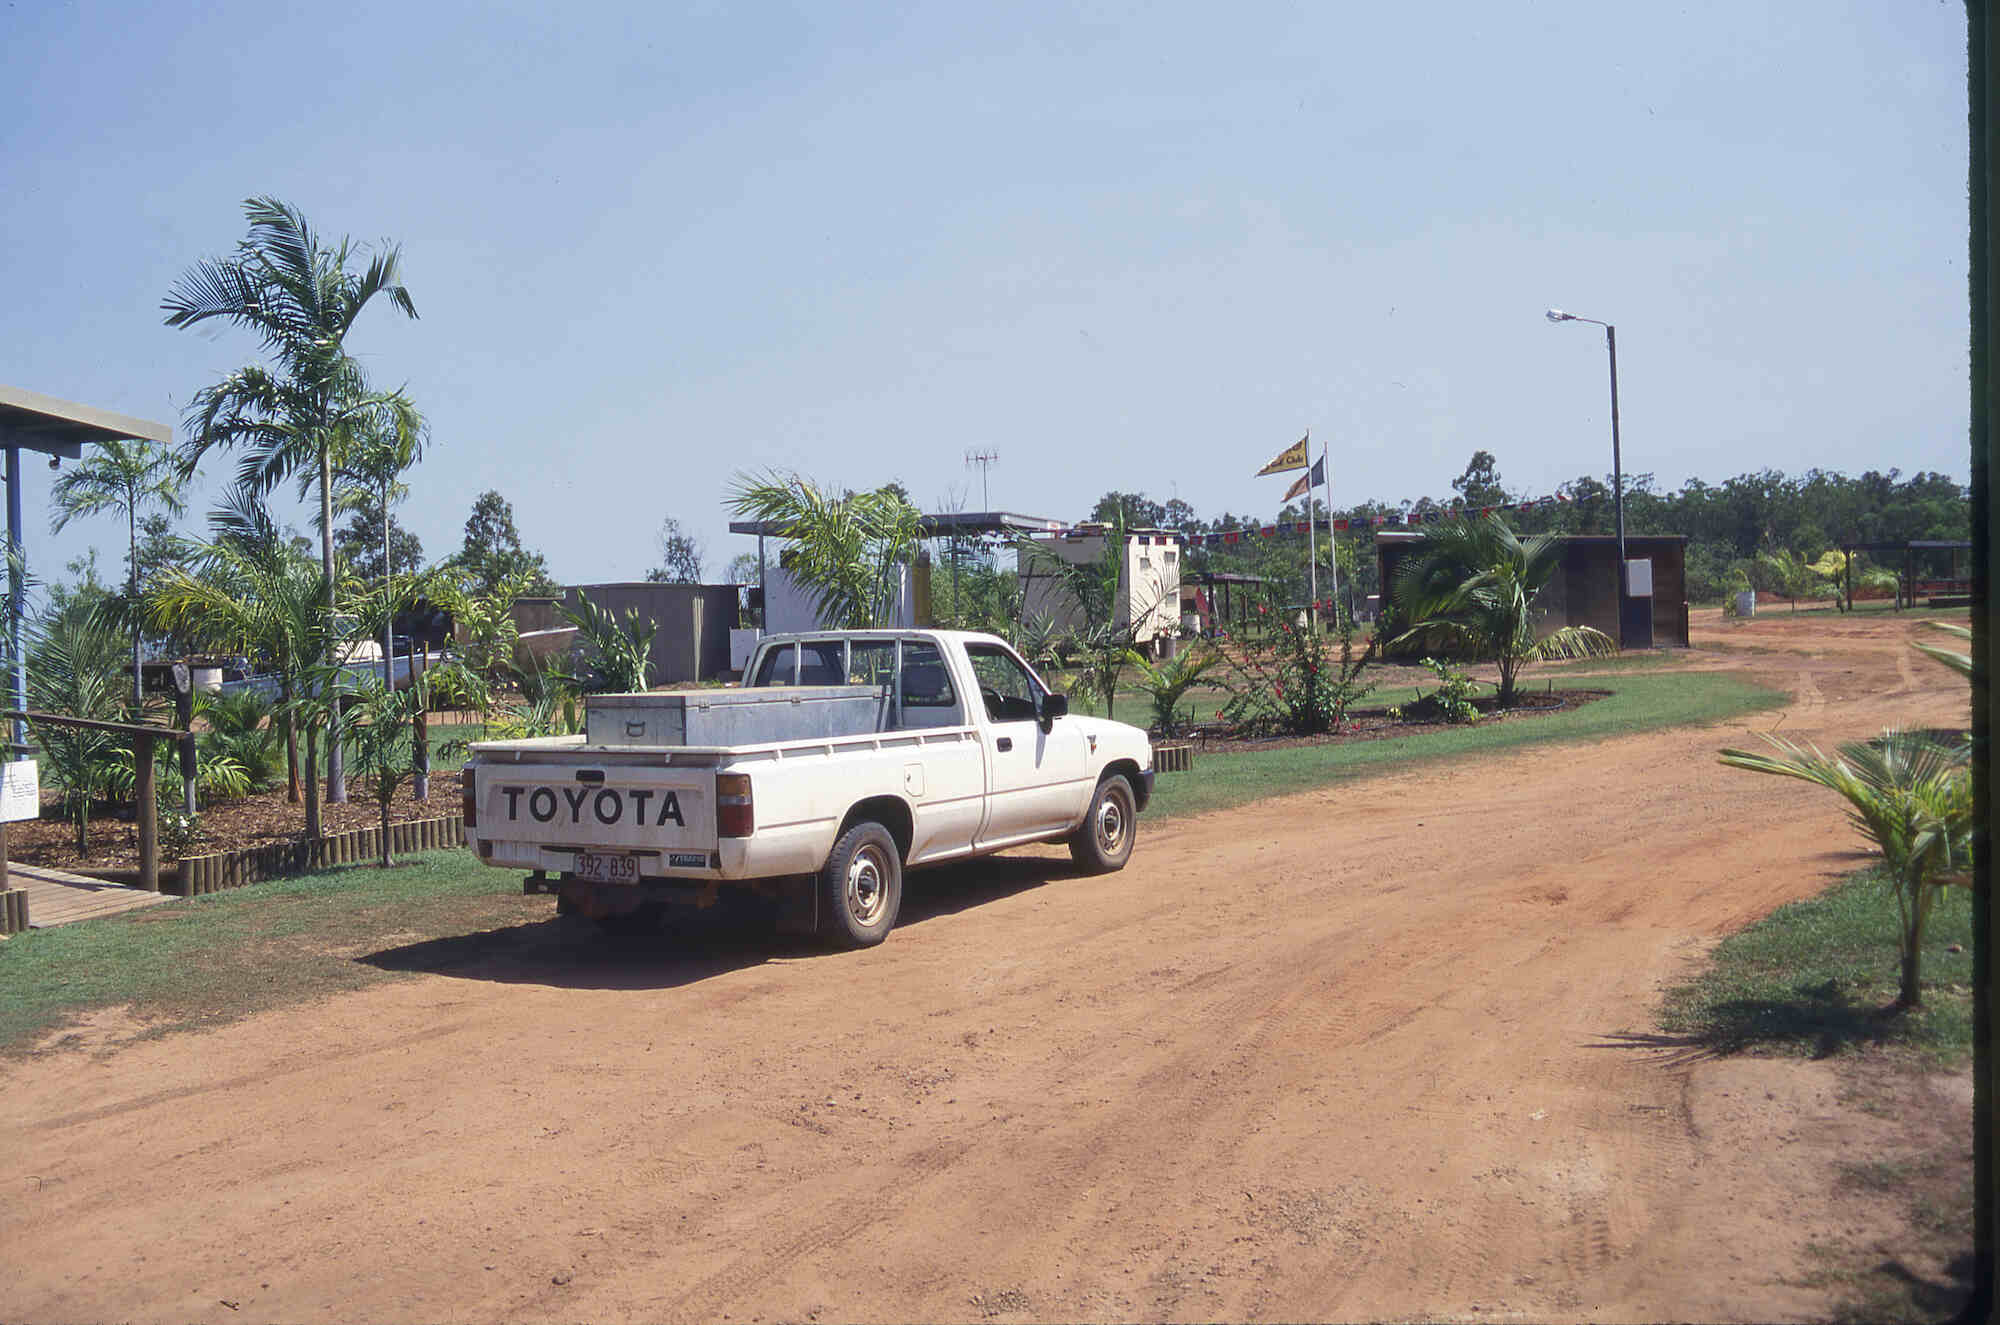 A used Toyota pickup truck parked on a dirt road